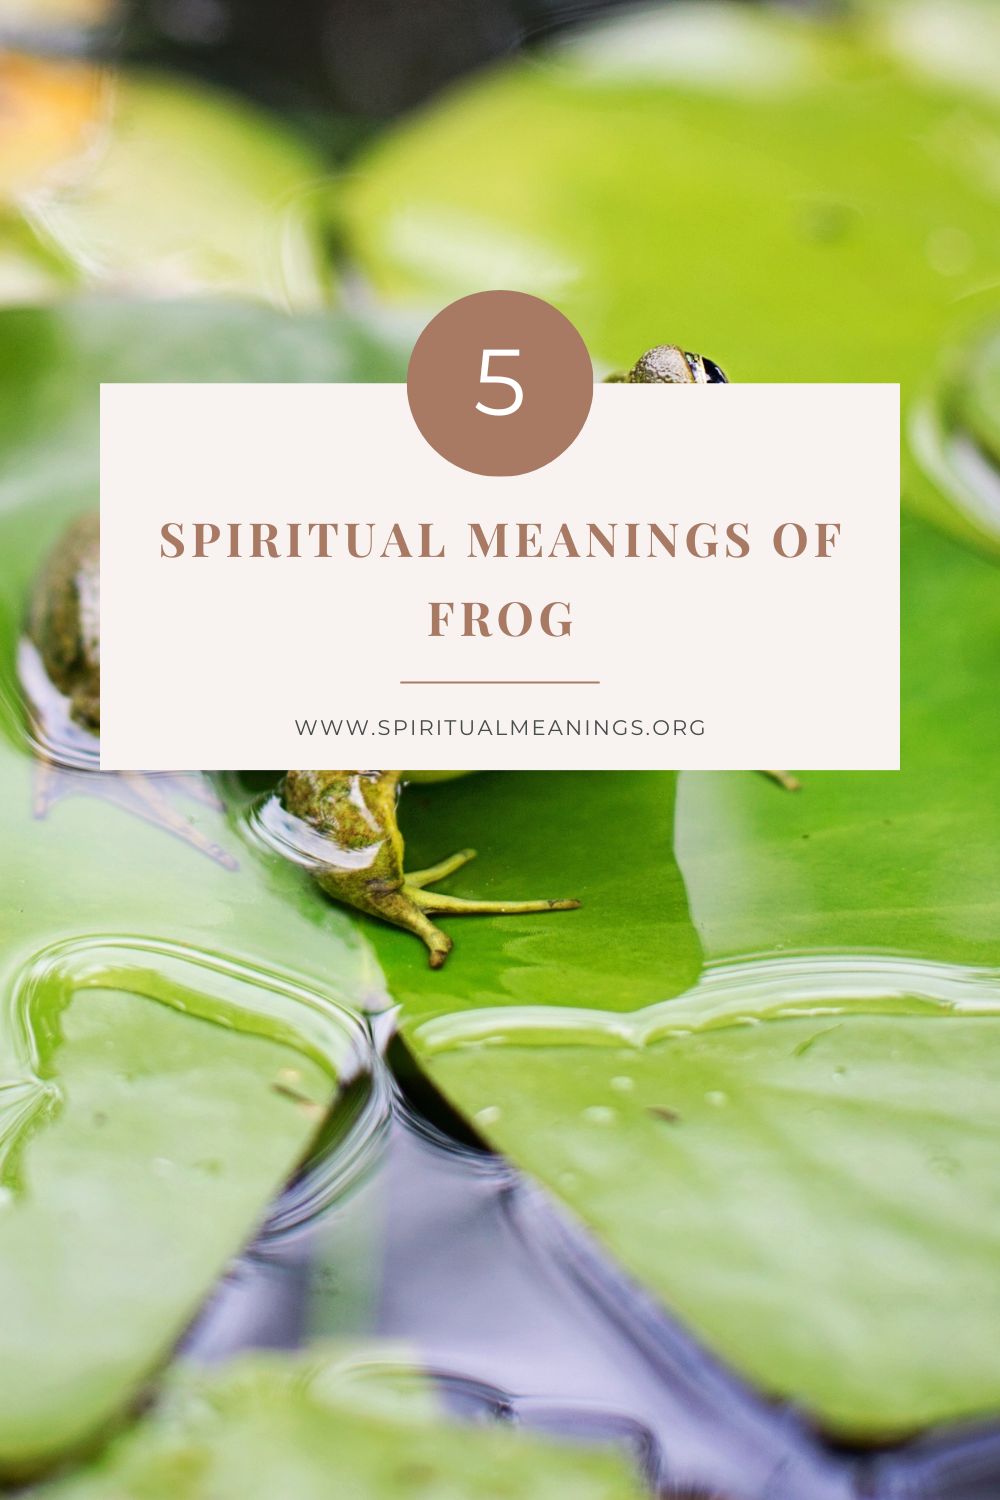 5 Spiritual Meanings of Frog